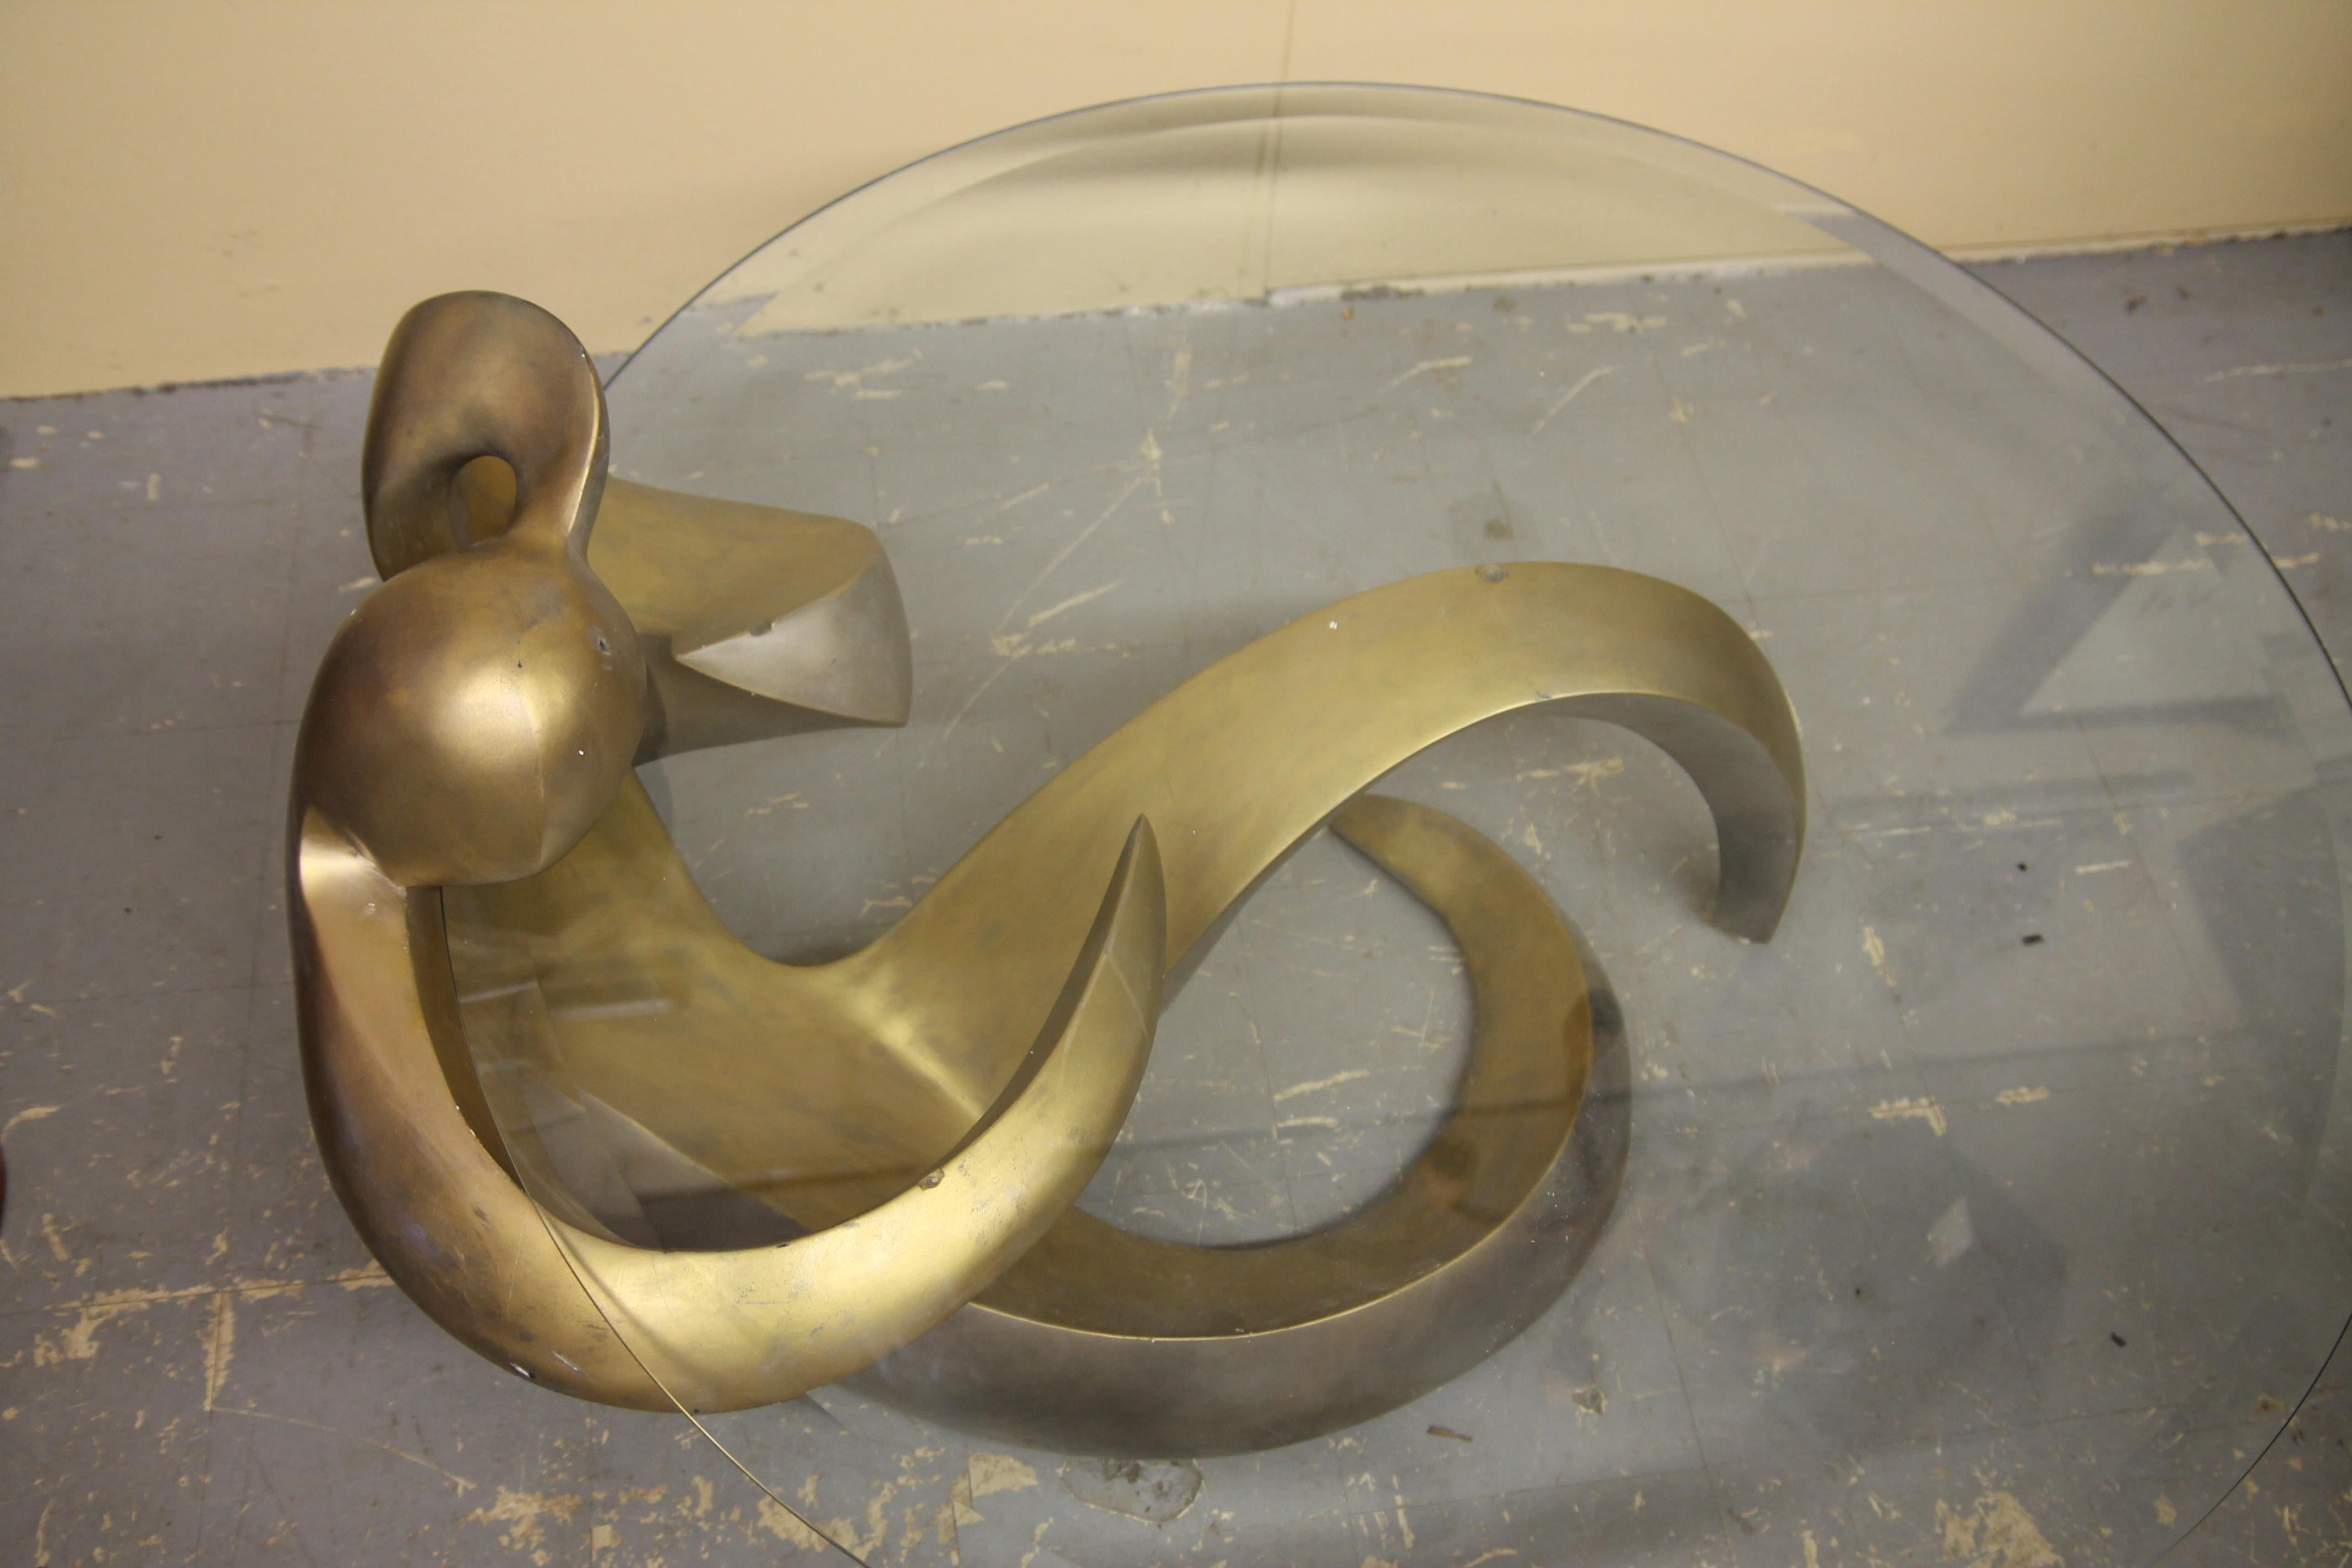 Wonderful and unique coffee table that looks like Henry Moore meets Fredrick Weinberg. Table is made incredibly well and is an example I have not seen before.